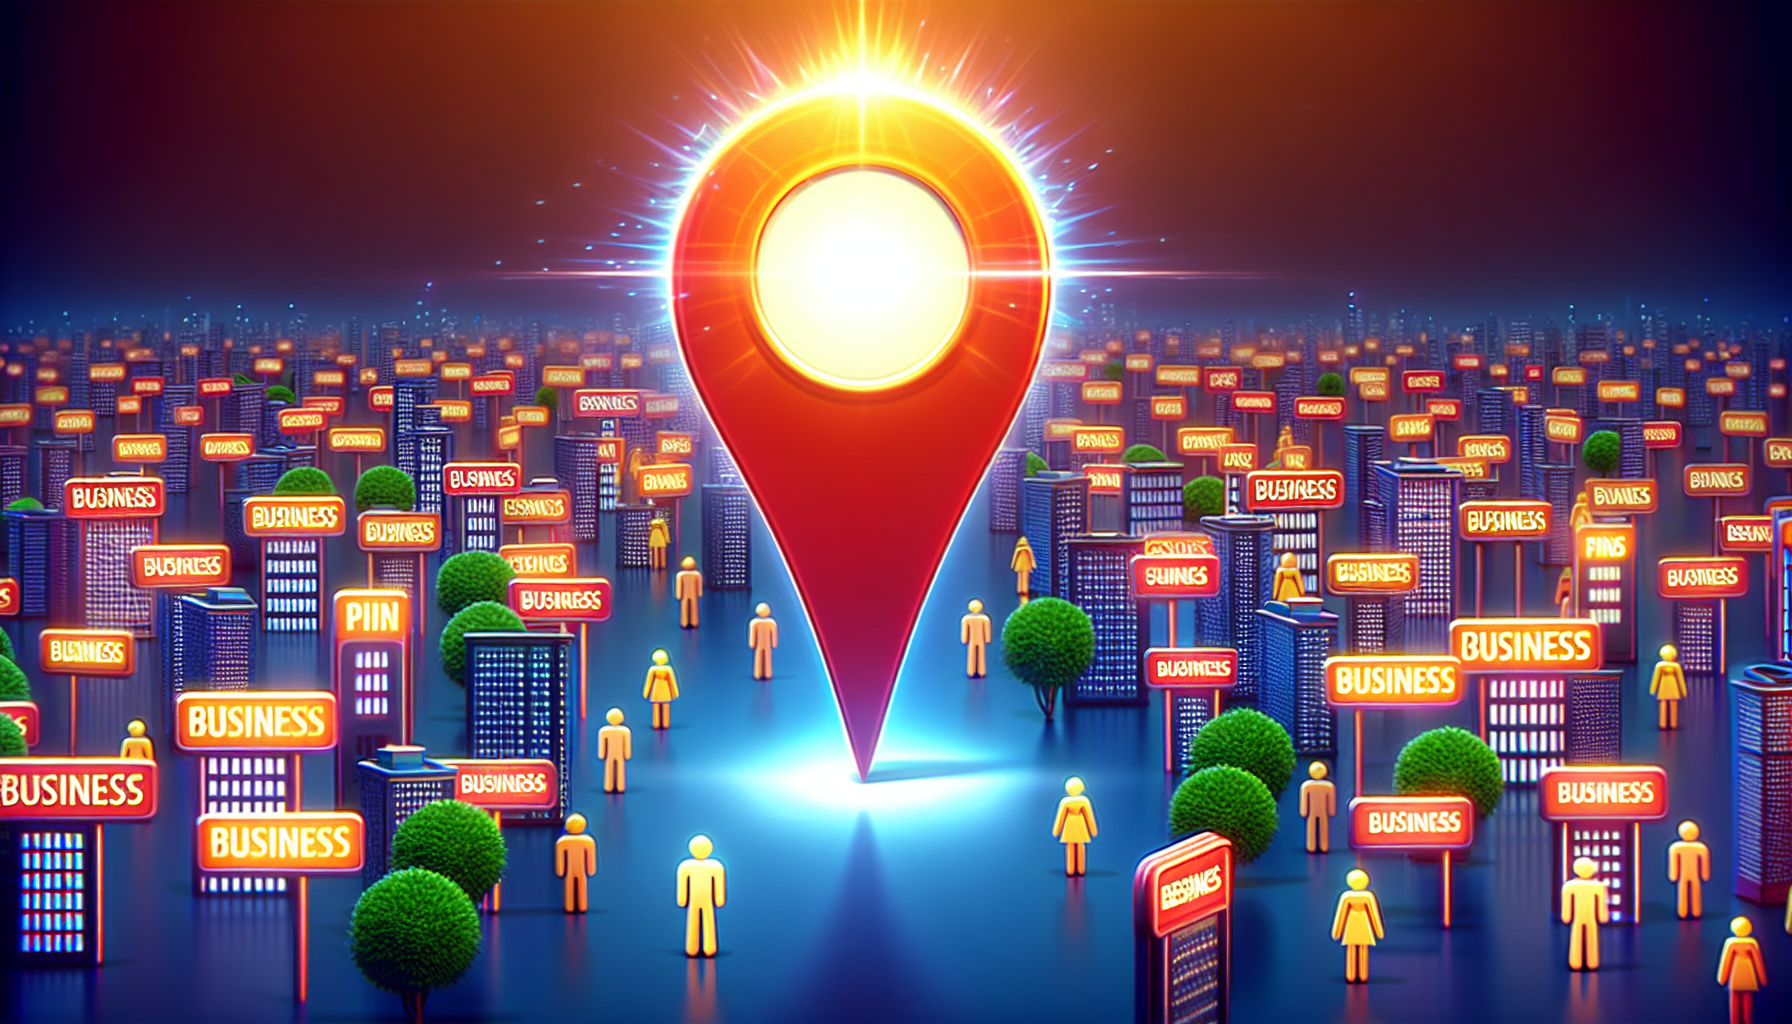 Google My Business for local visibility